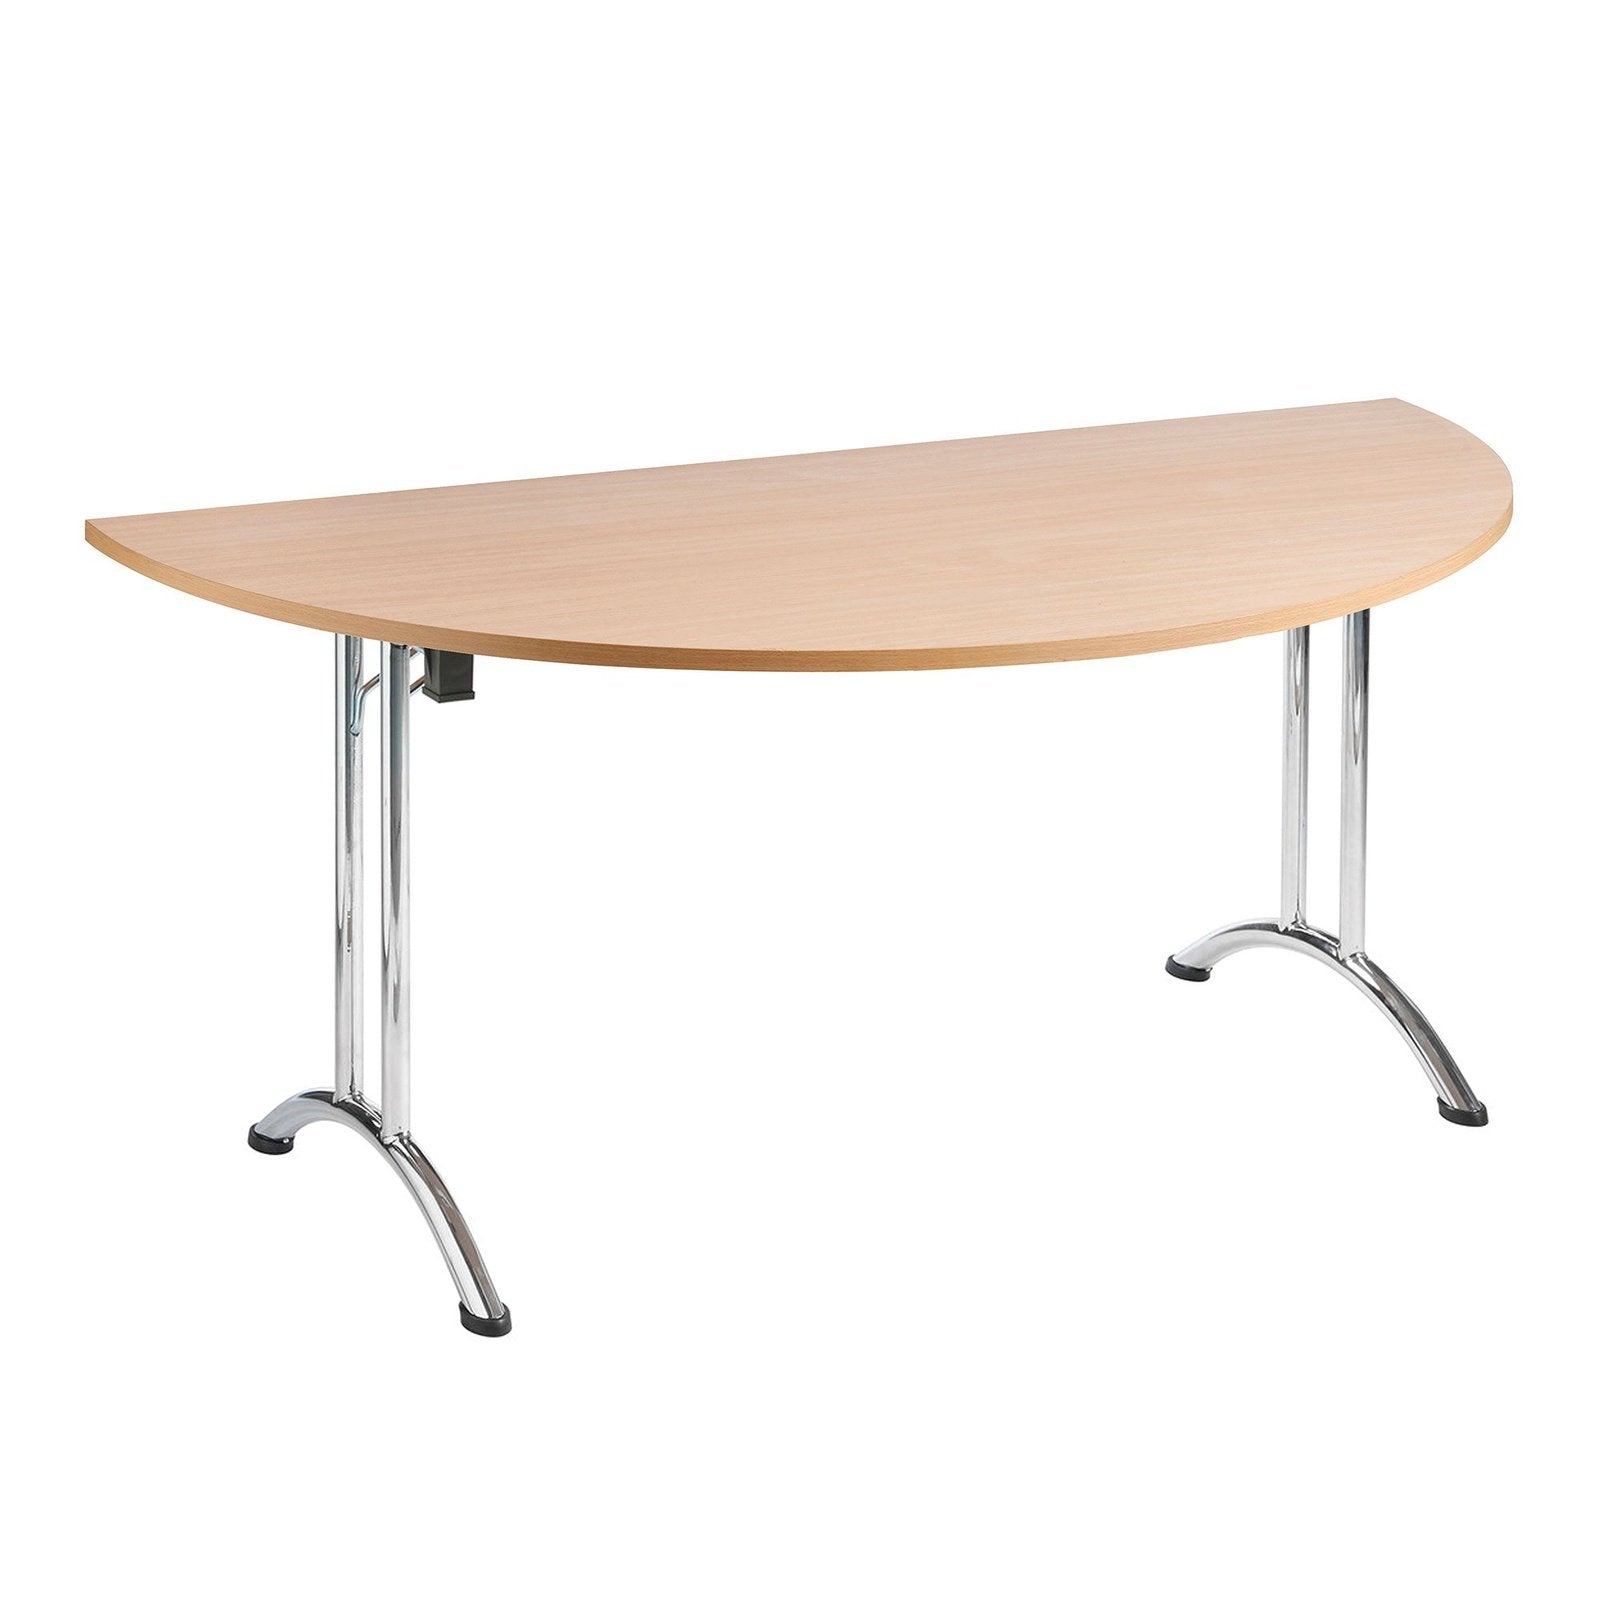 Folding Semi-circular Table - 1600x800mm - Office Products Online